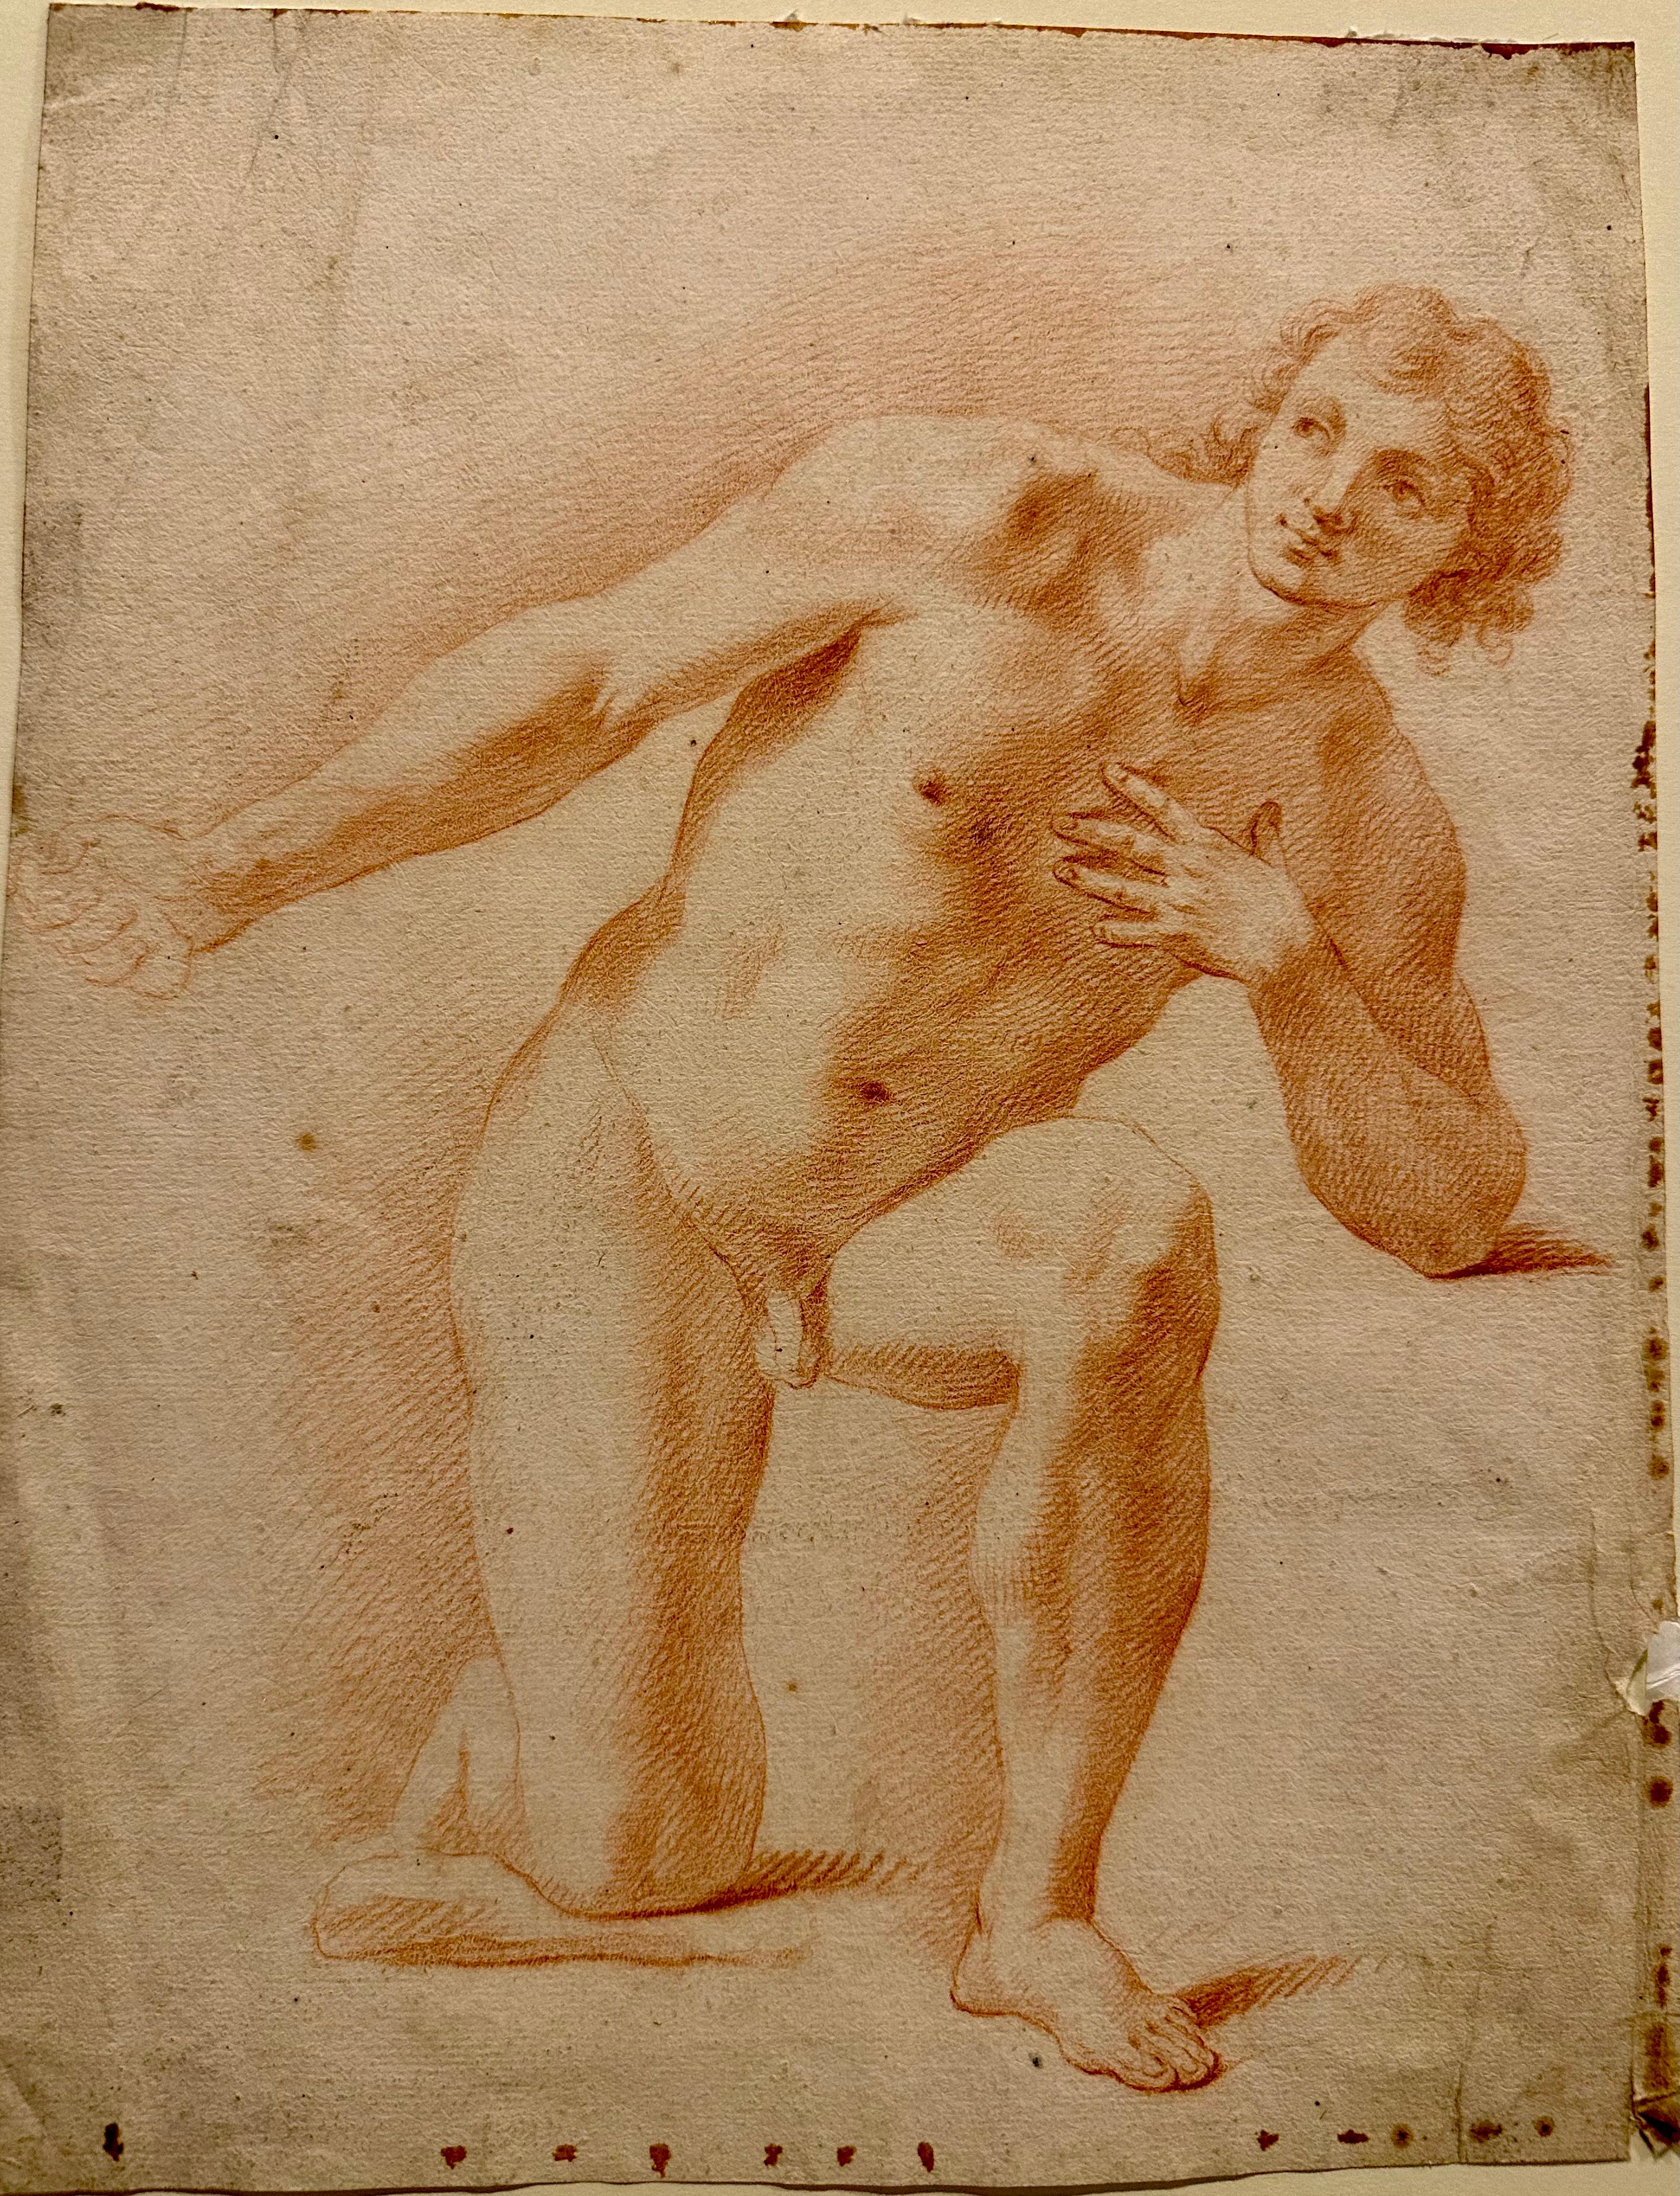 Italian Bolognese Late 17th Century Red Chalk (Sanguine) Drawing of a Kneeling Young Man. Circa 1680

This Sanguine drawing is in good condition. Small dark brown spots are visible around the edges of the sheet.

This drawing from the end of the